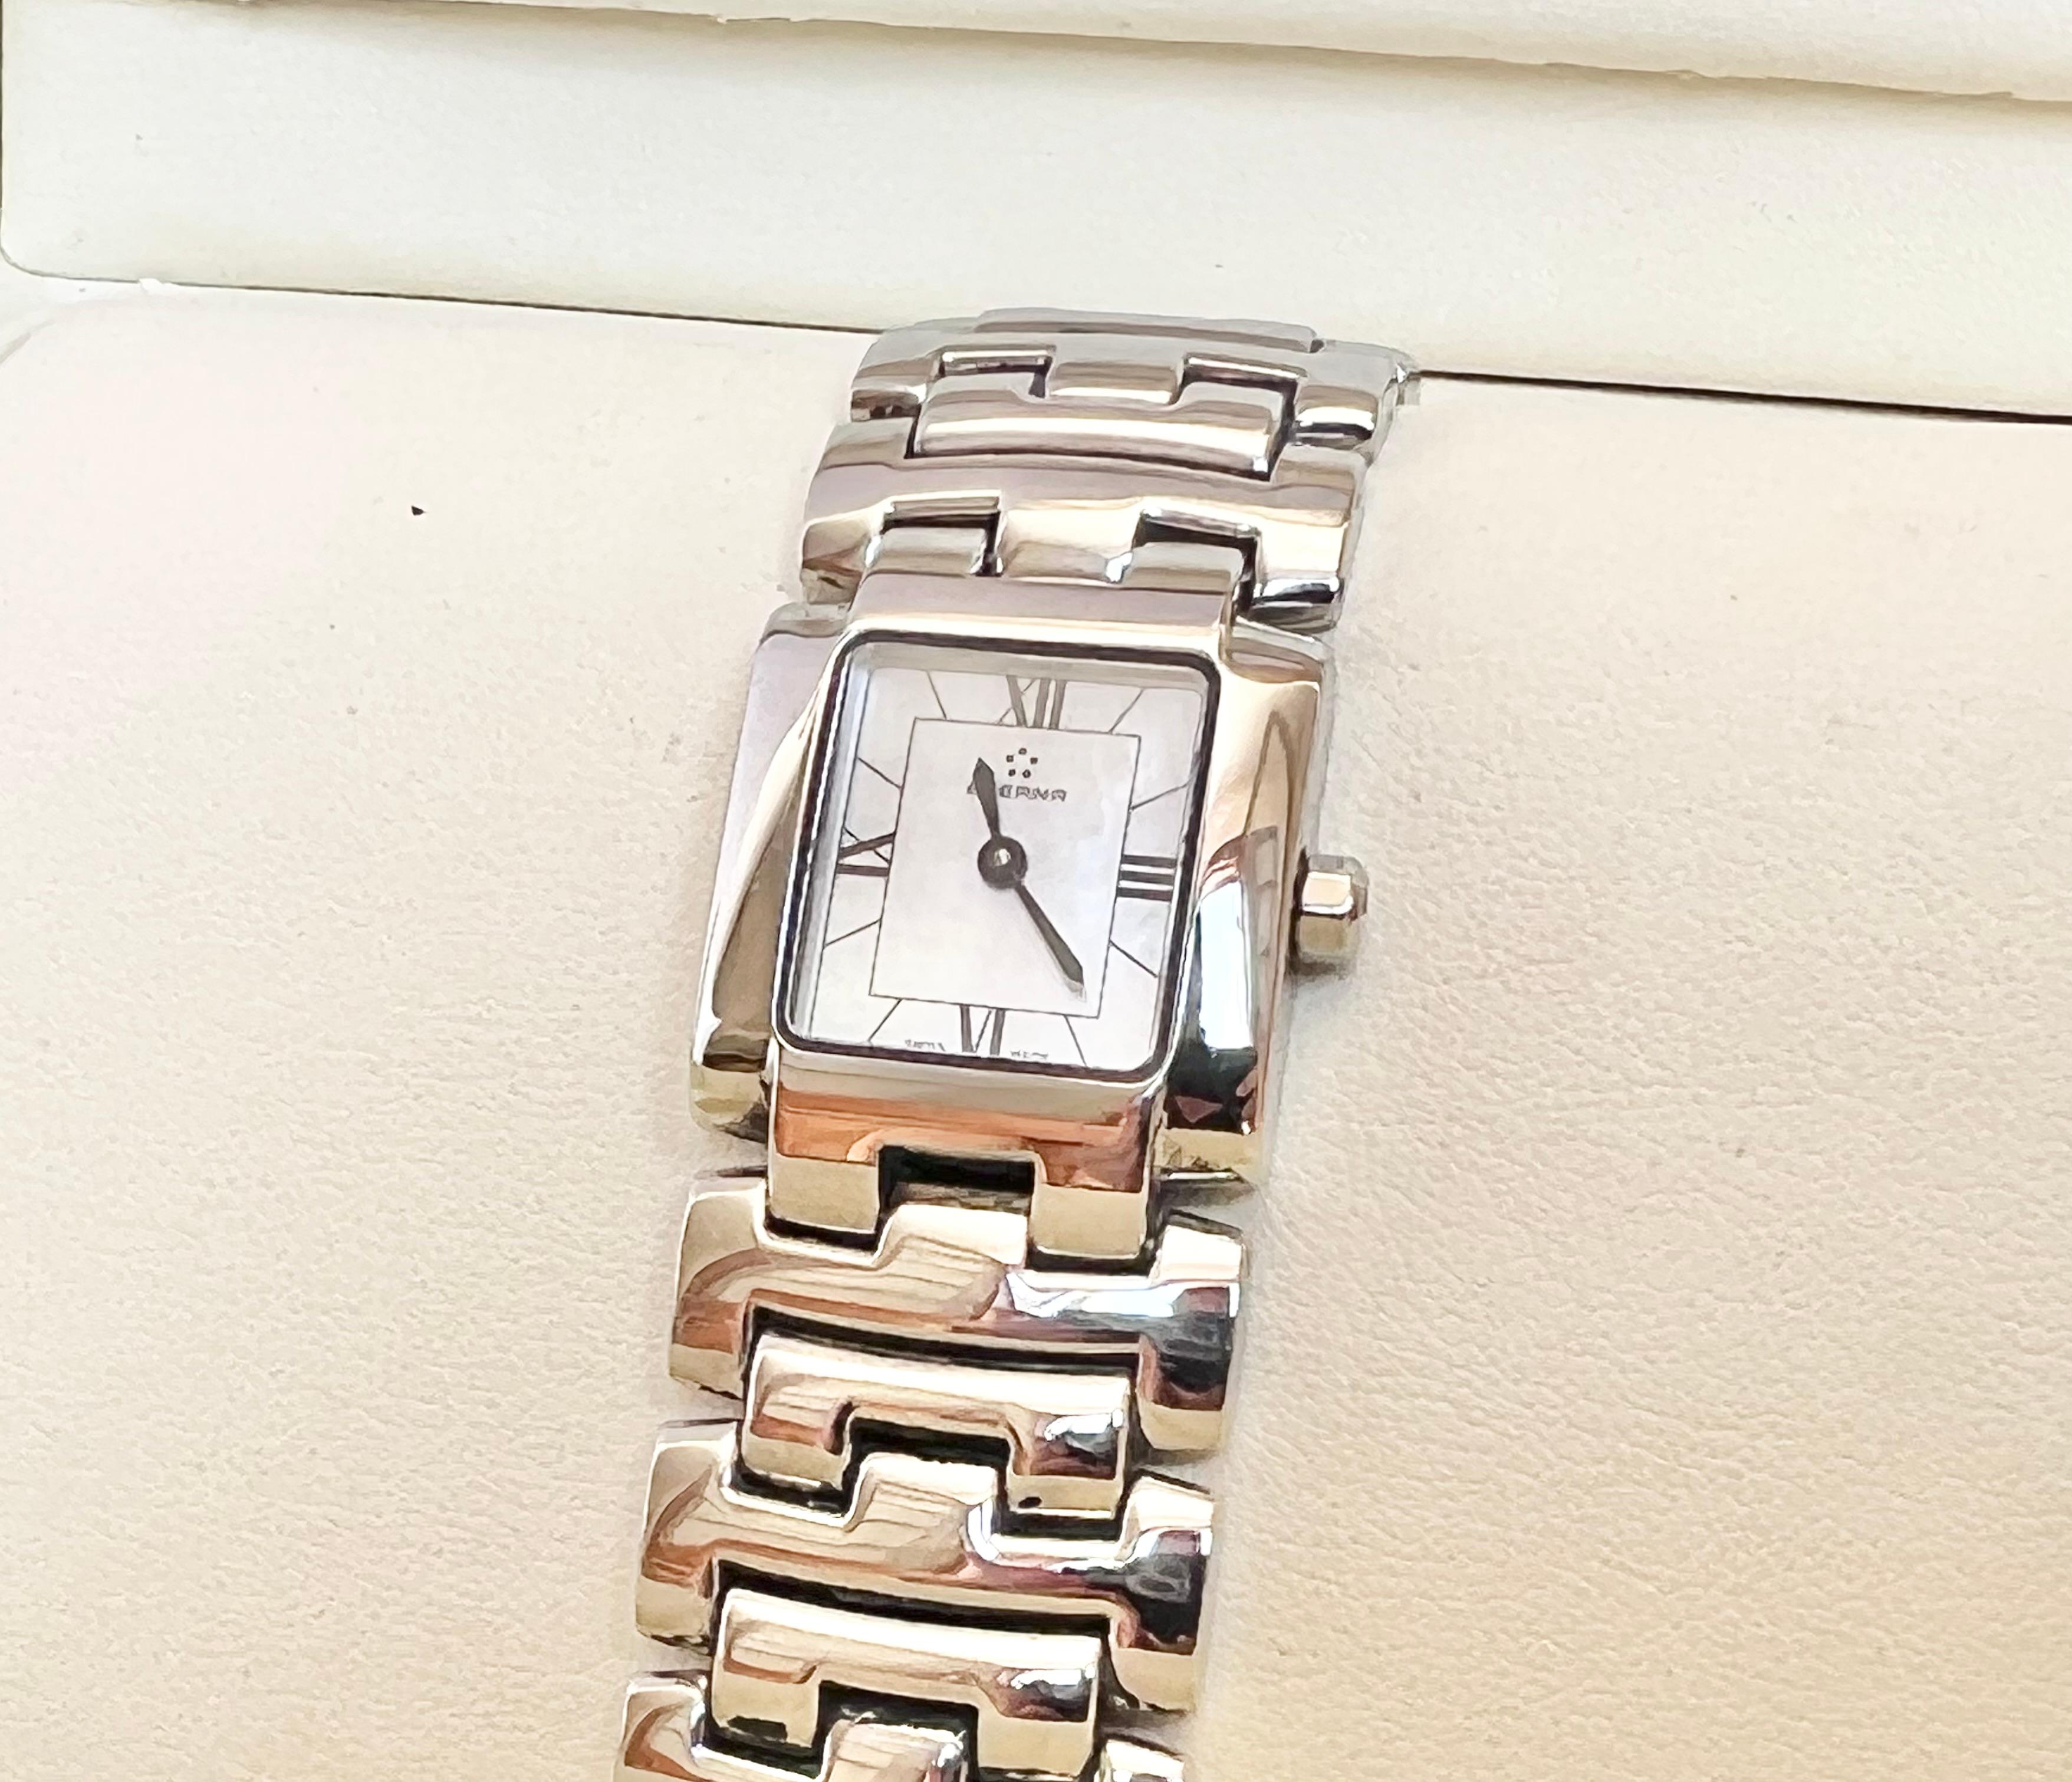 Brand : Eterna

Model: Minx 2608.41/C

Referance Number:2608.41/C

Features: MOP Dial

Country Of Manufacture: Switzerland

Movement: Quartz

Case Material: Stainless Steel

Measurements : :22mm diameter (excluding crown )

Band Type : Steel